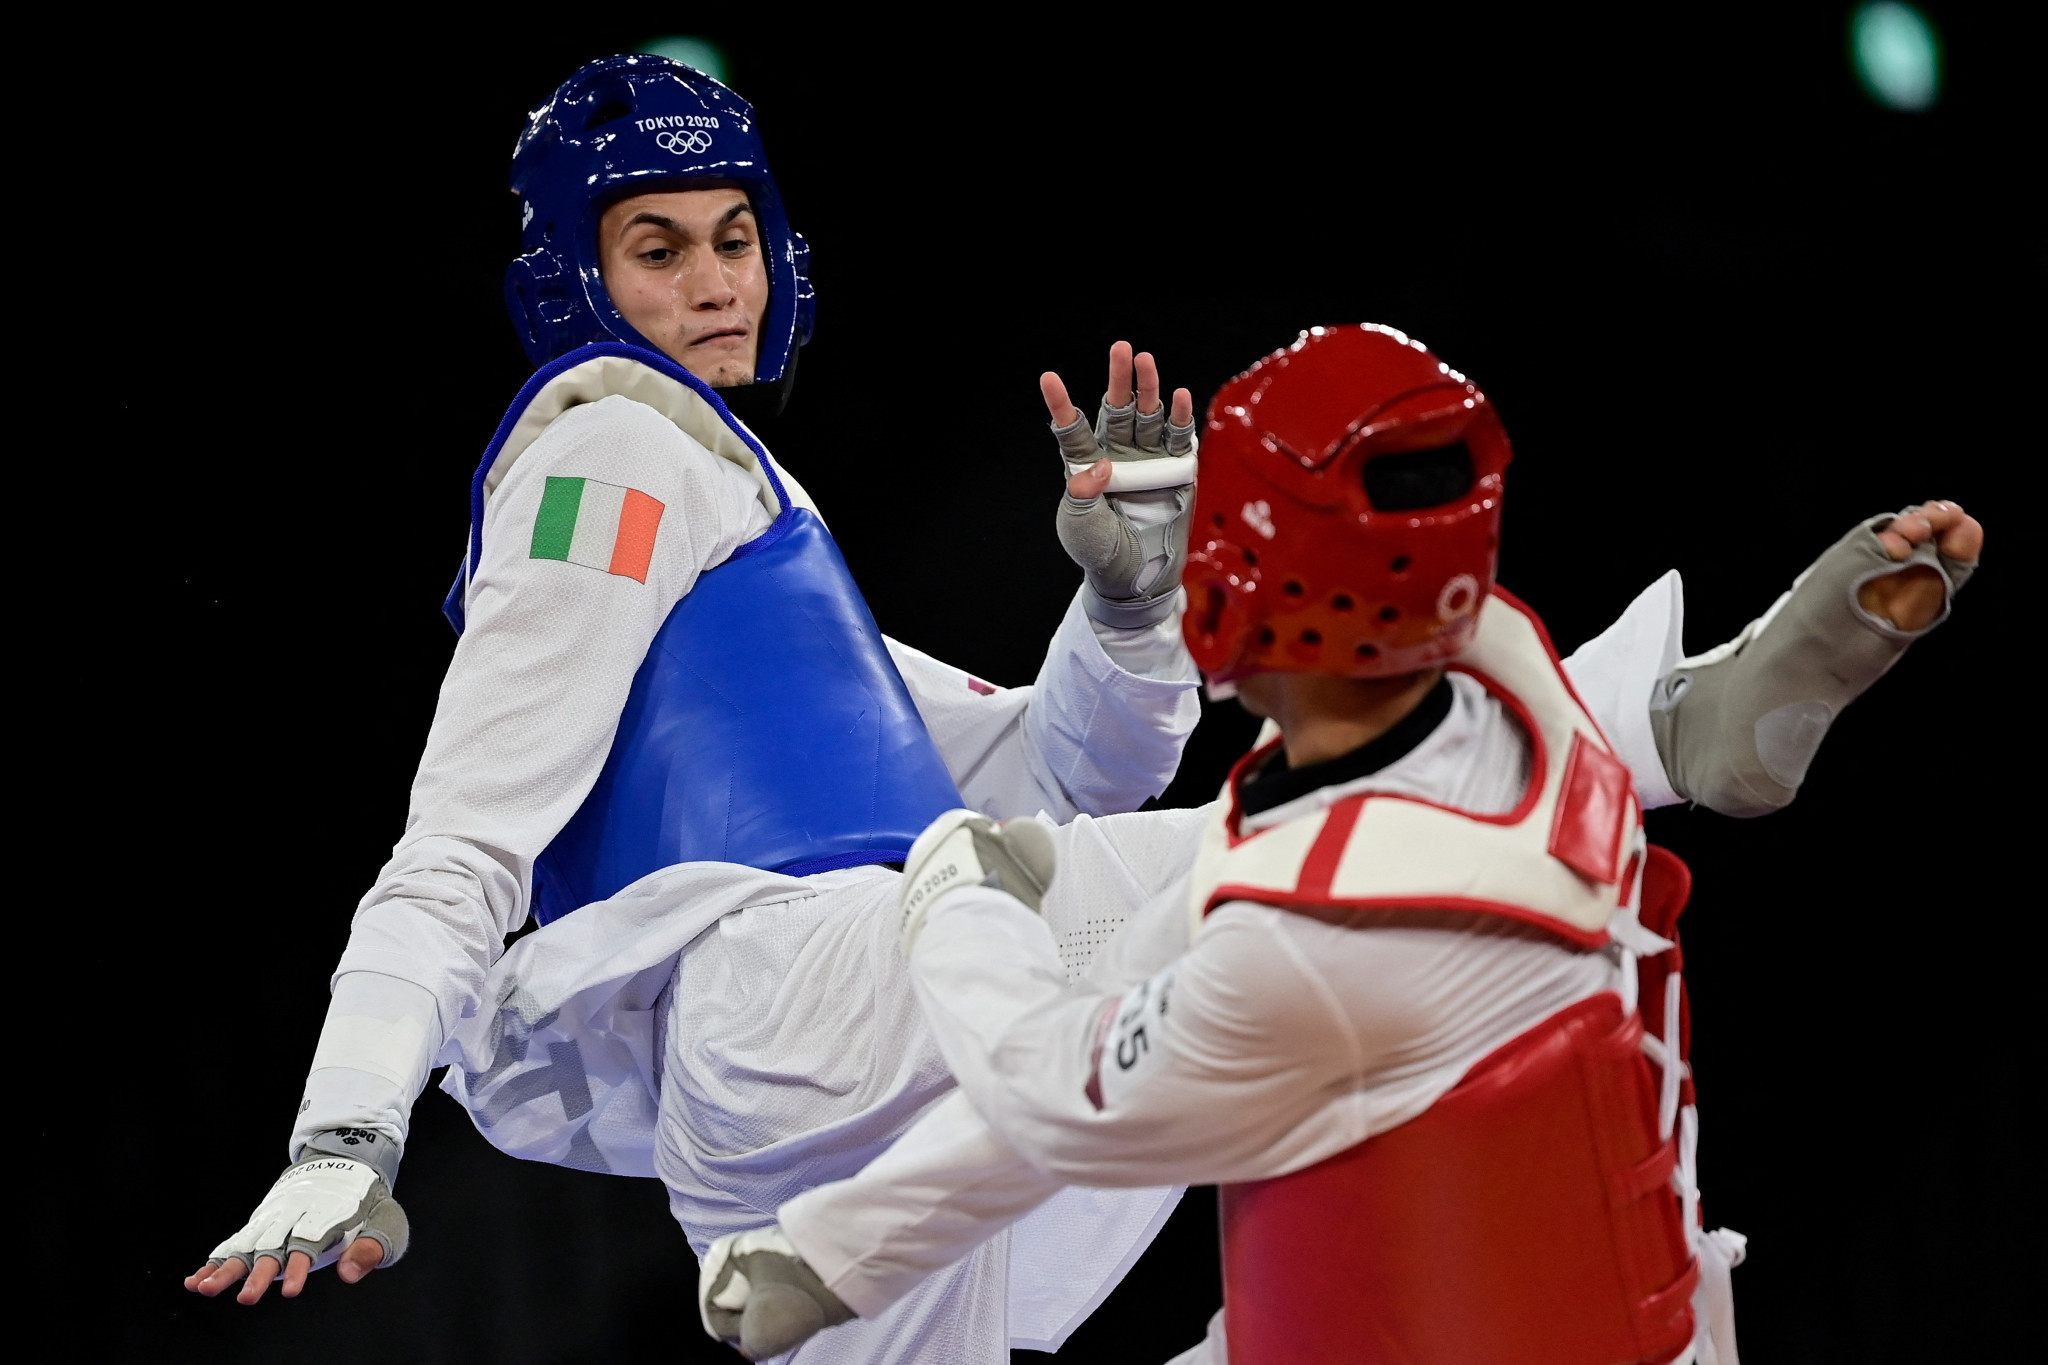 Italy's Simone Alessio claimed his second world title with success at the recent World Taekwondo Championships in Baku ©Getty Images